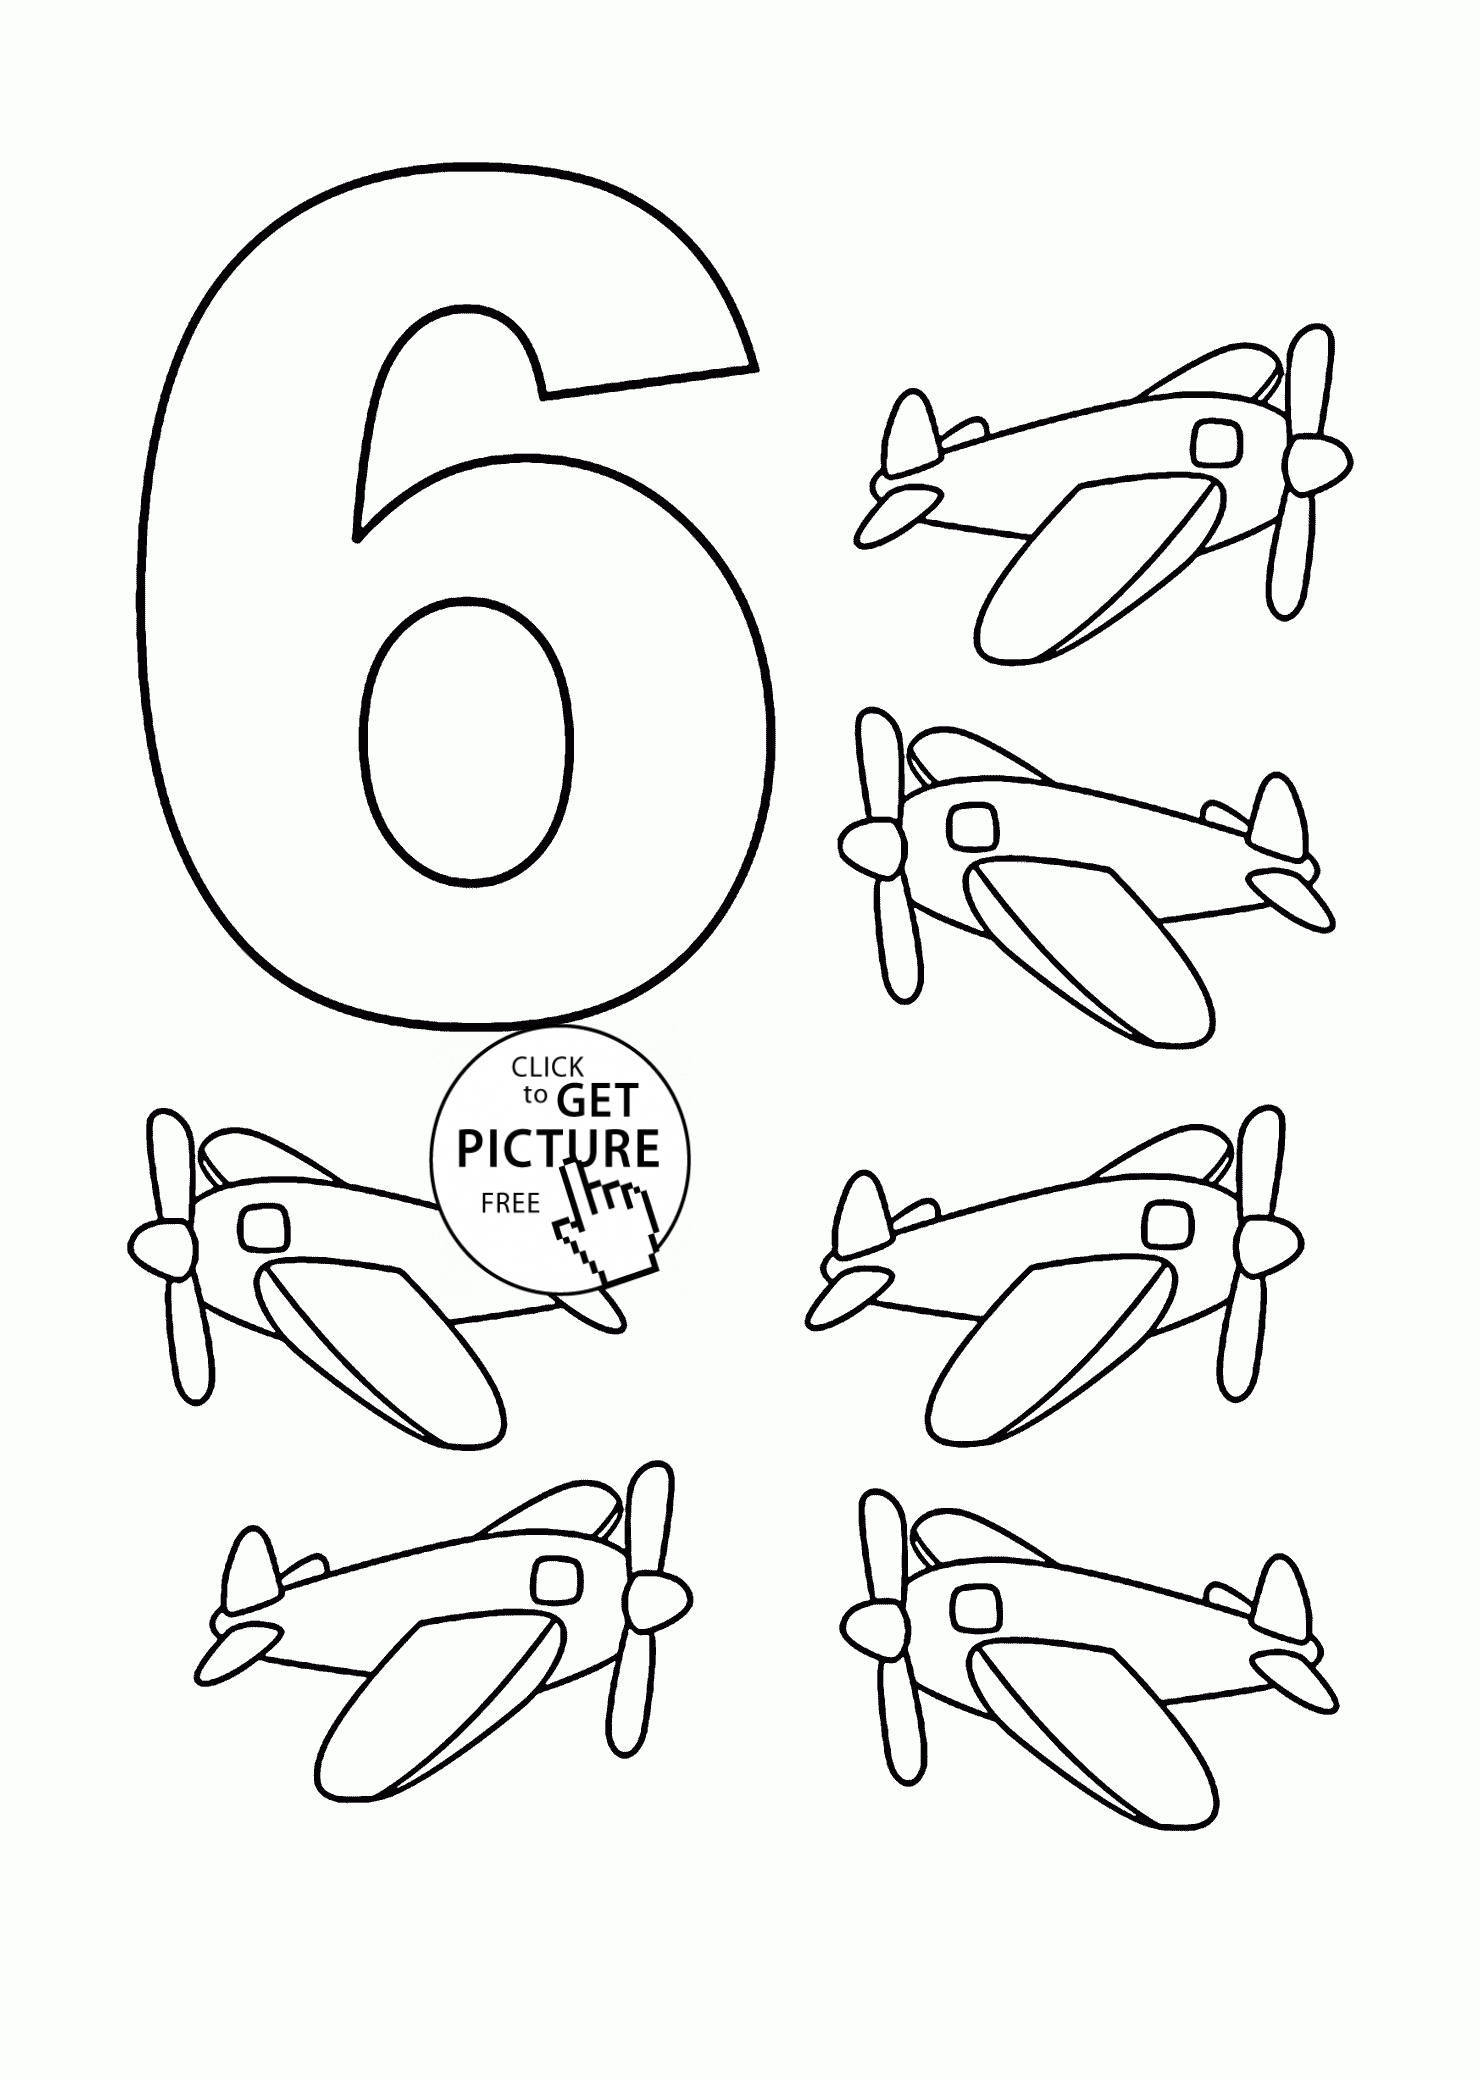 19 Coloring Pages By Number